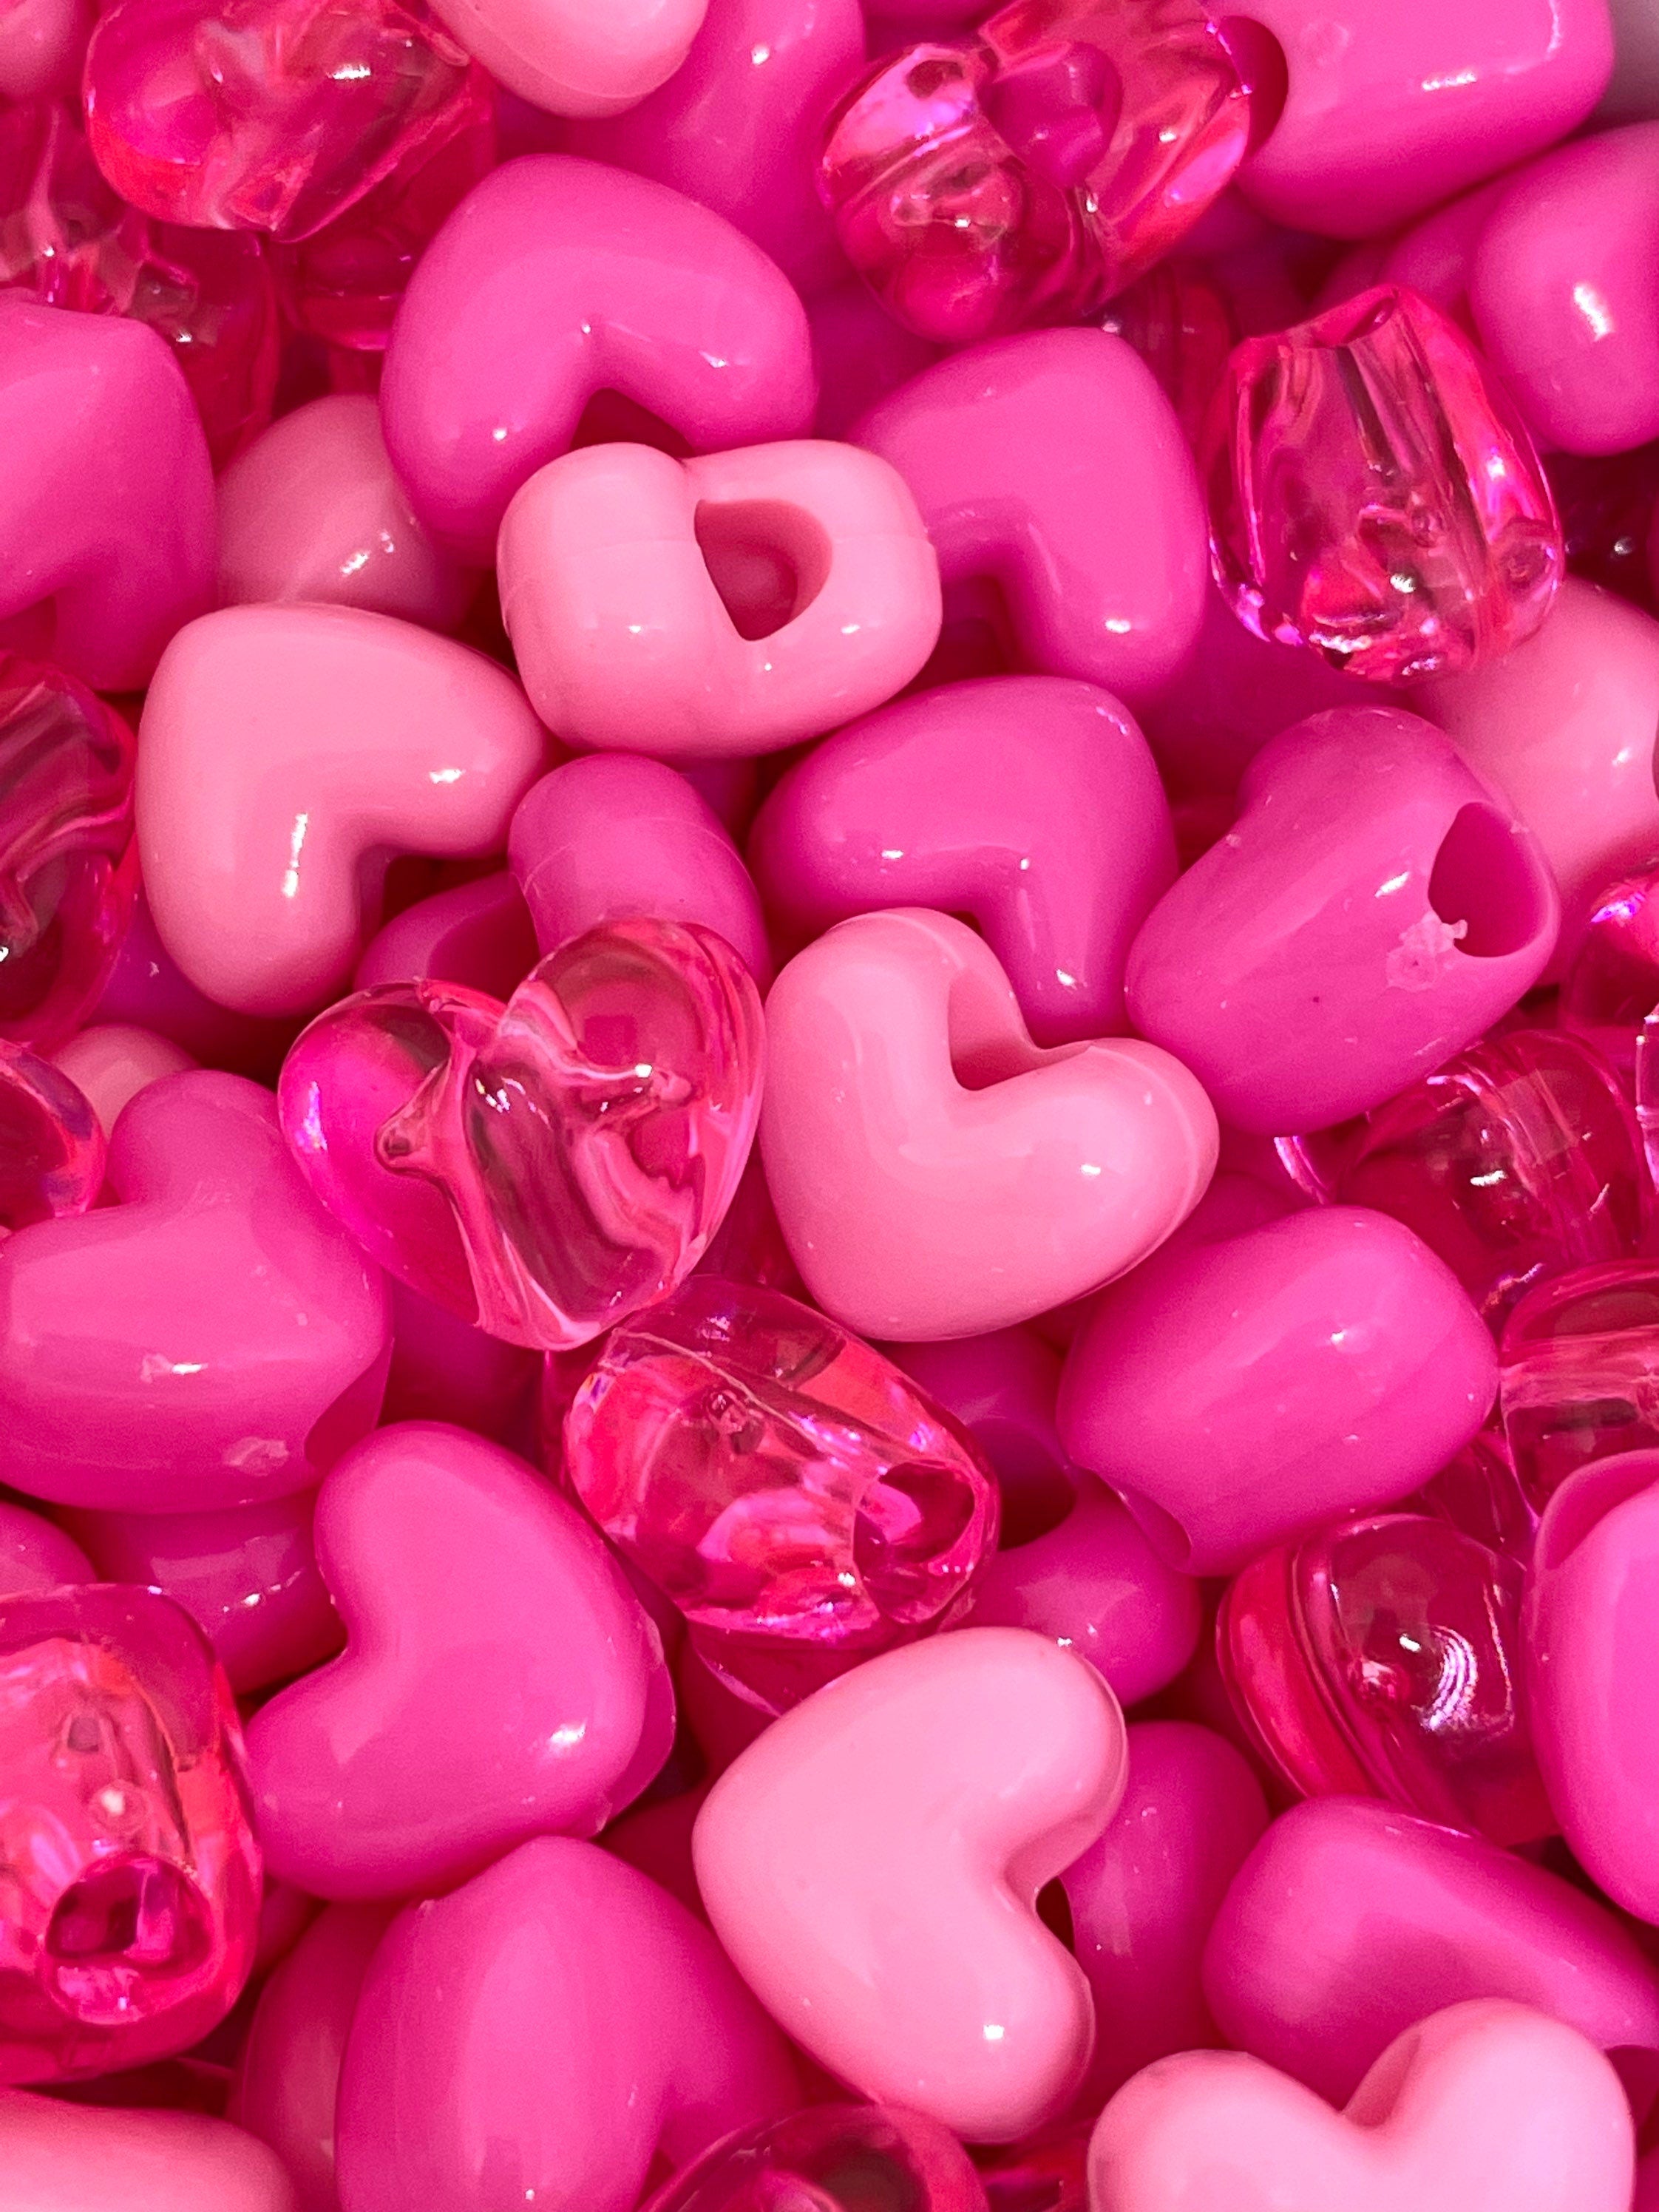 100pcs Love Heart Plastic Beads 8x8x5mm Hearts Shapes Spacer Bead